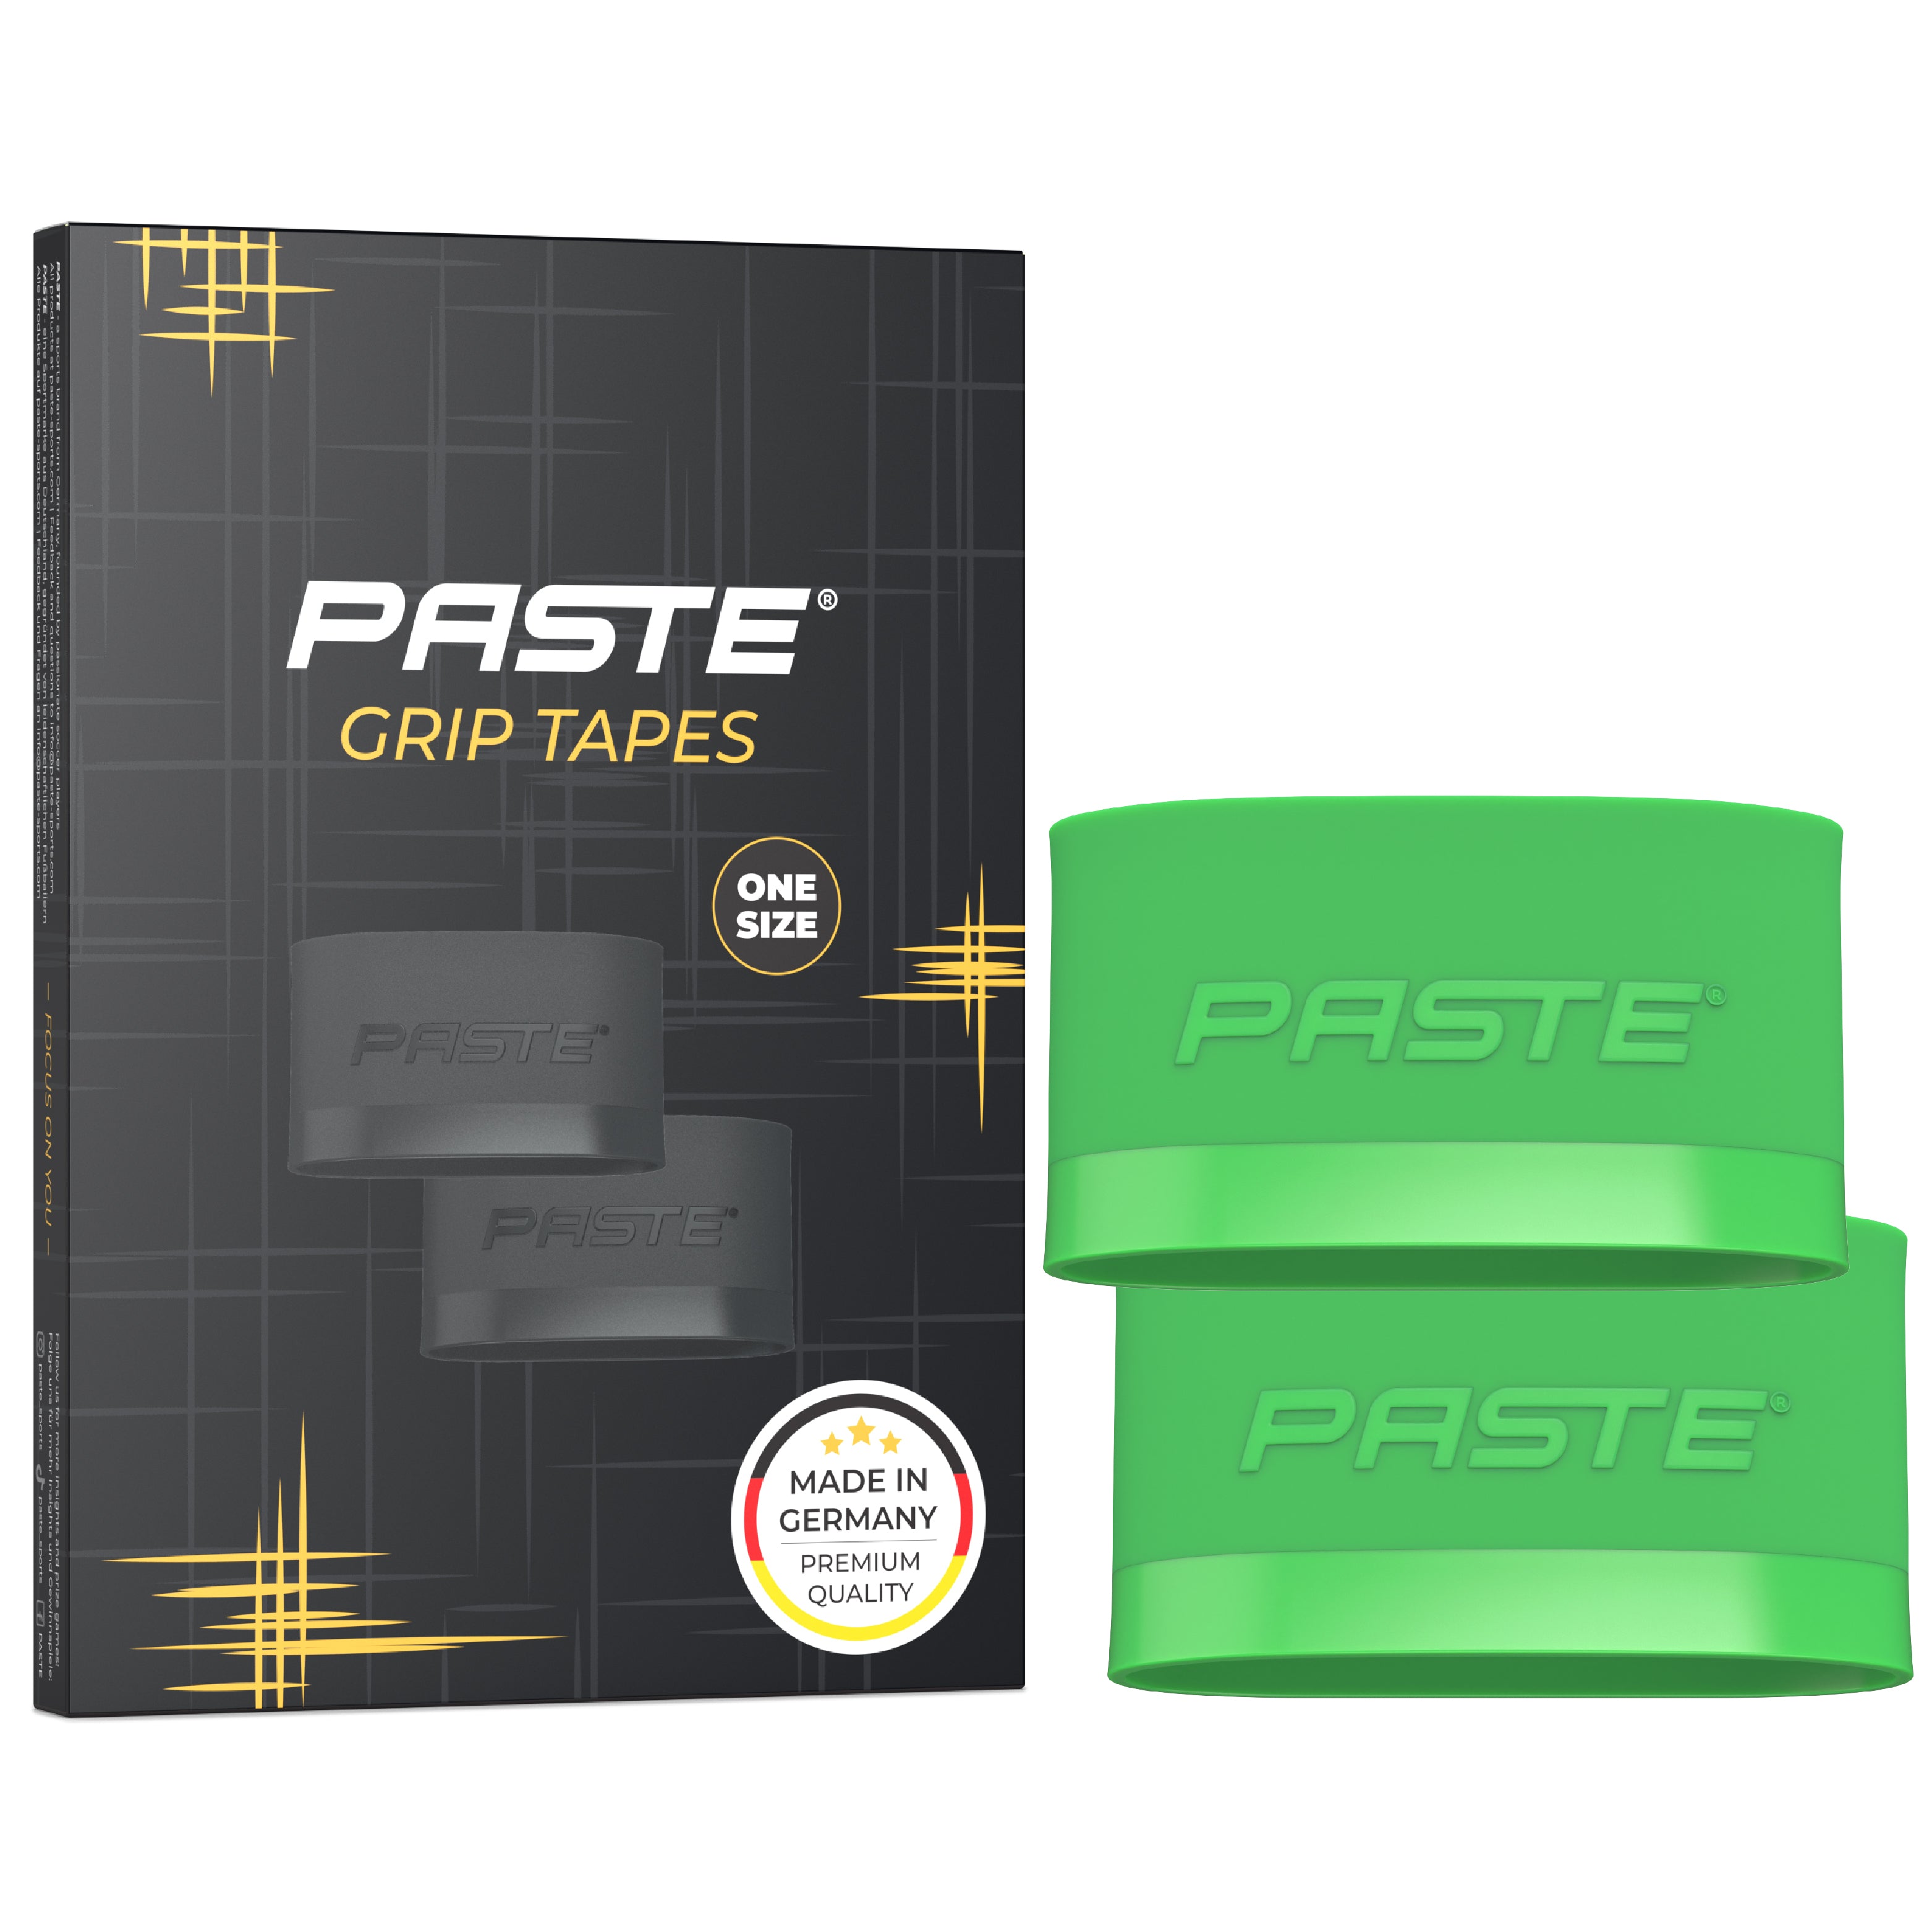 2 pairs of Grip Tapes of your choice (save 5,00 €!) – PASTE®